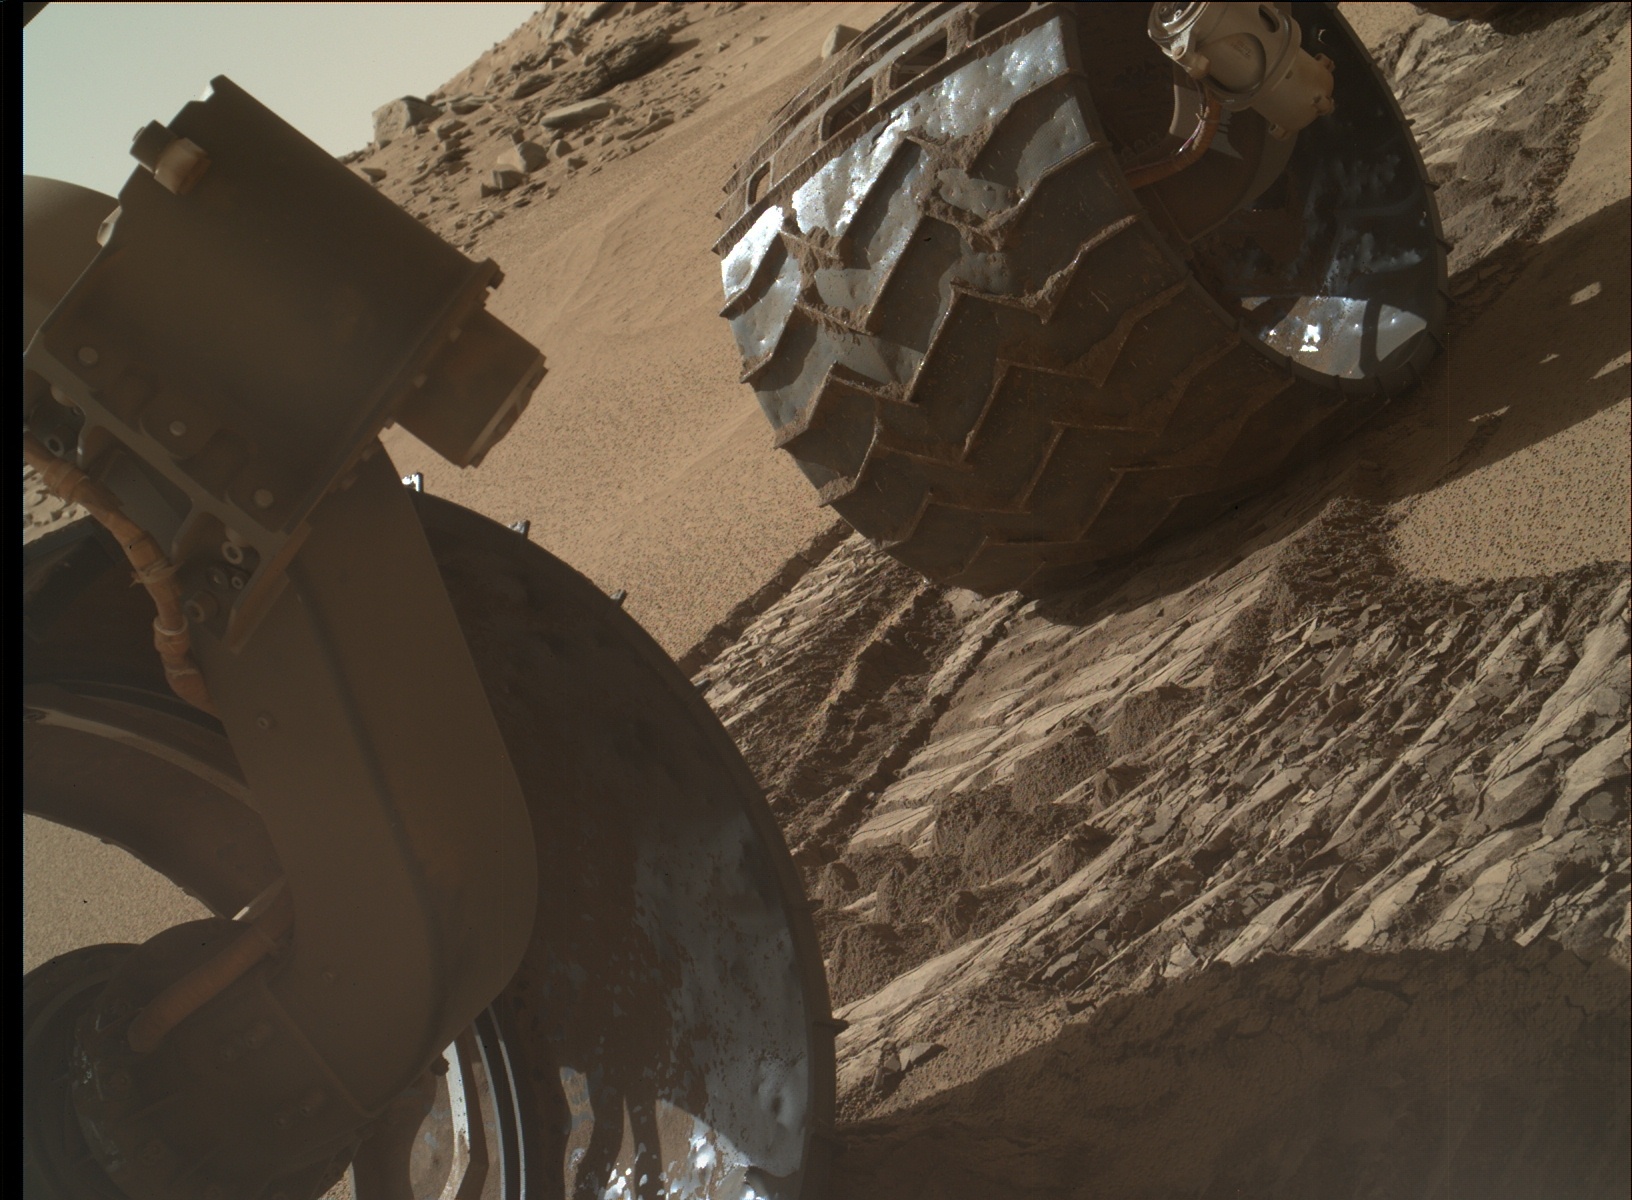 Nasa's Mars rover Curiosity acquired this image using its Mars Hand Lens Imager (MAHLI) on Sol 529, at drive 184, site number 26